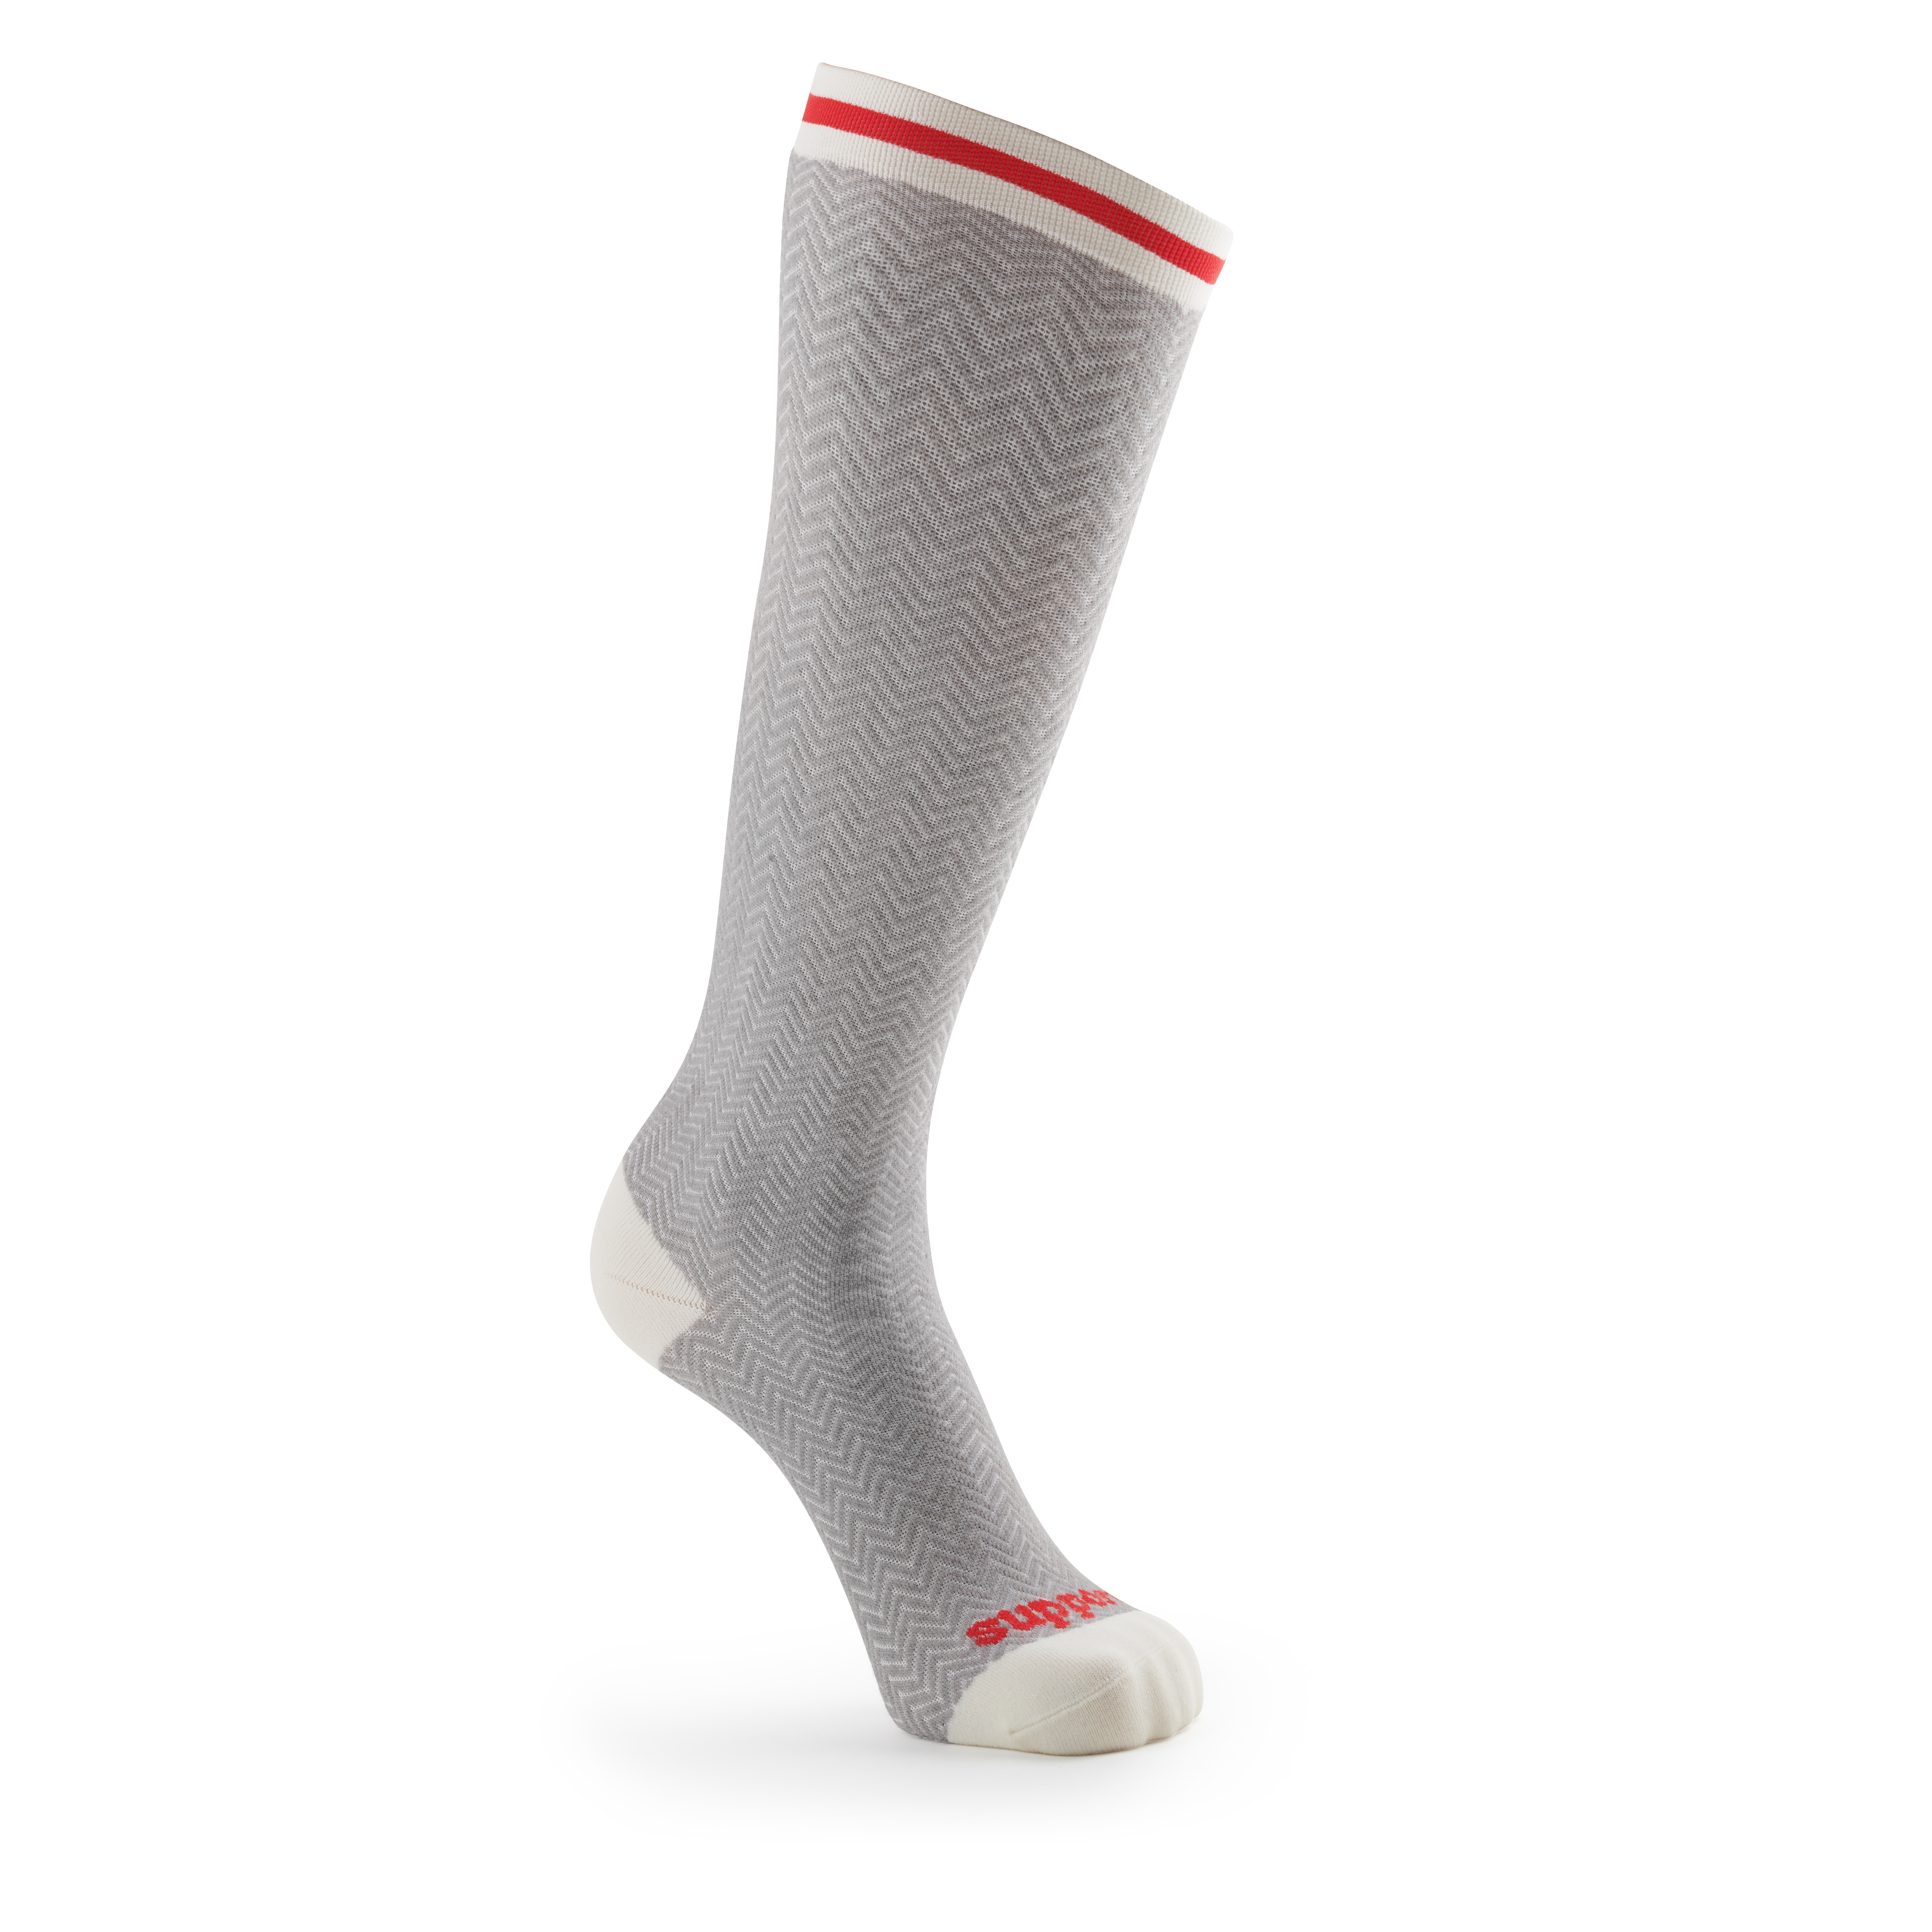 Worker Knee-High 15-20mmHg Compression Socks - Supporo